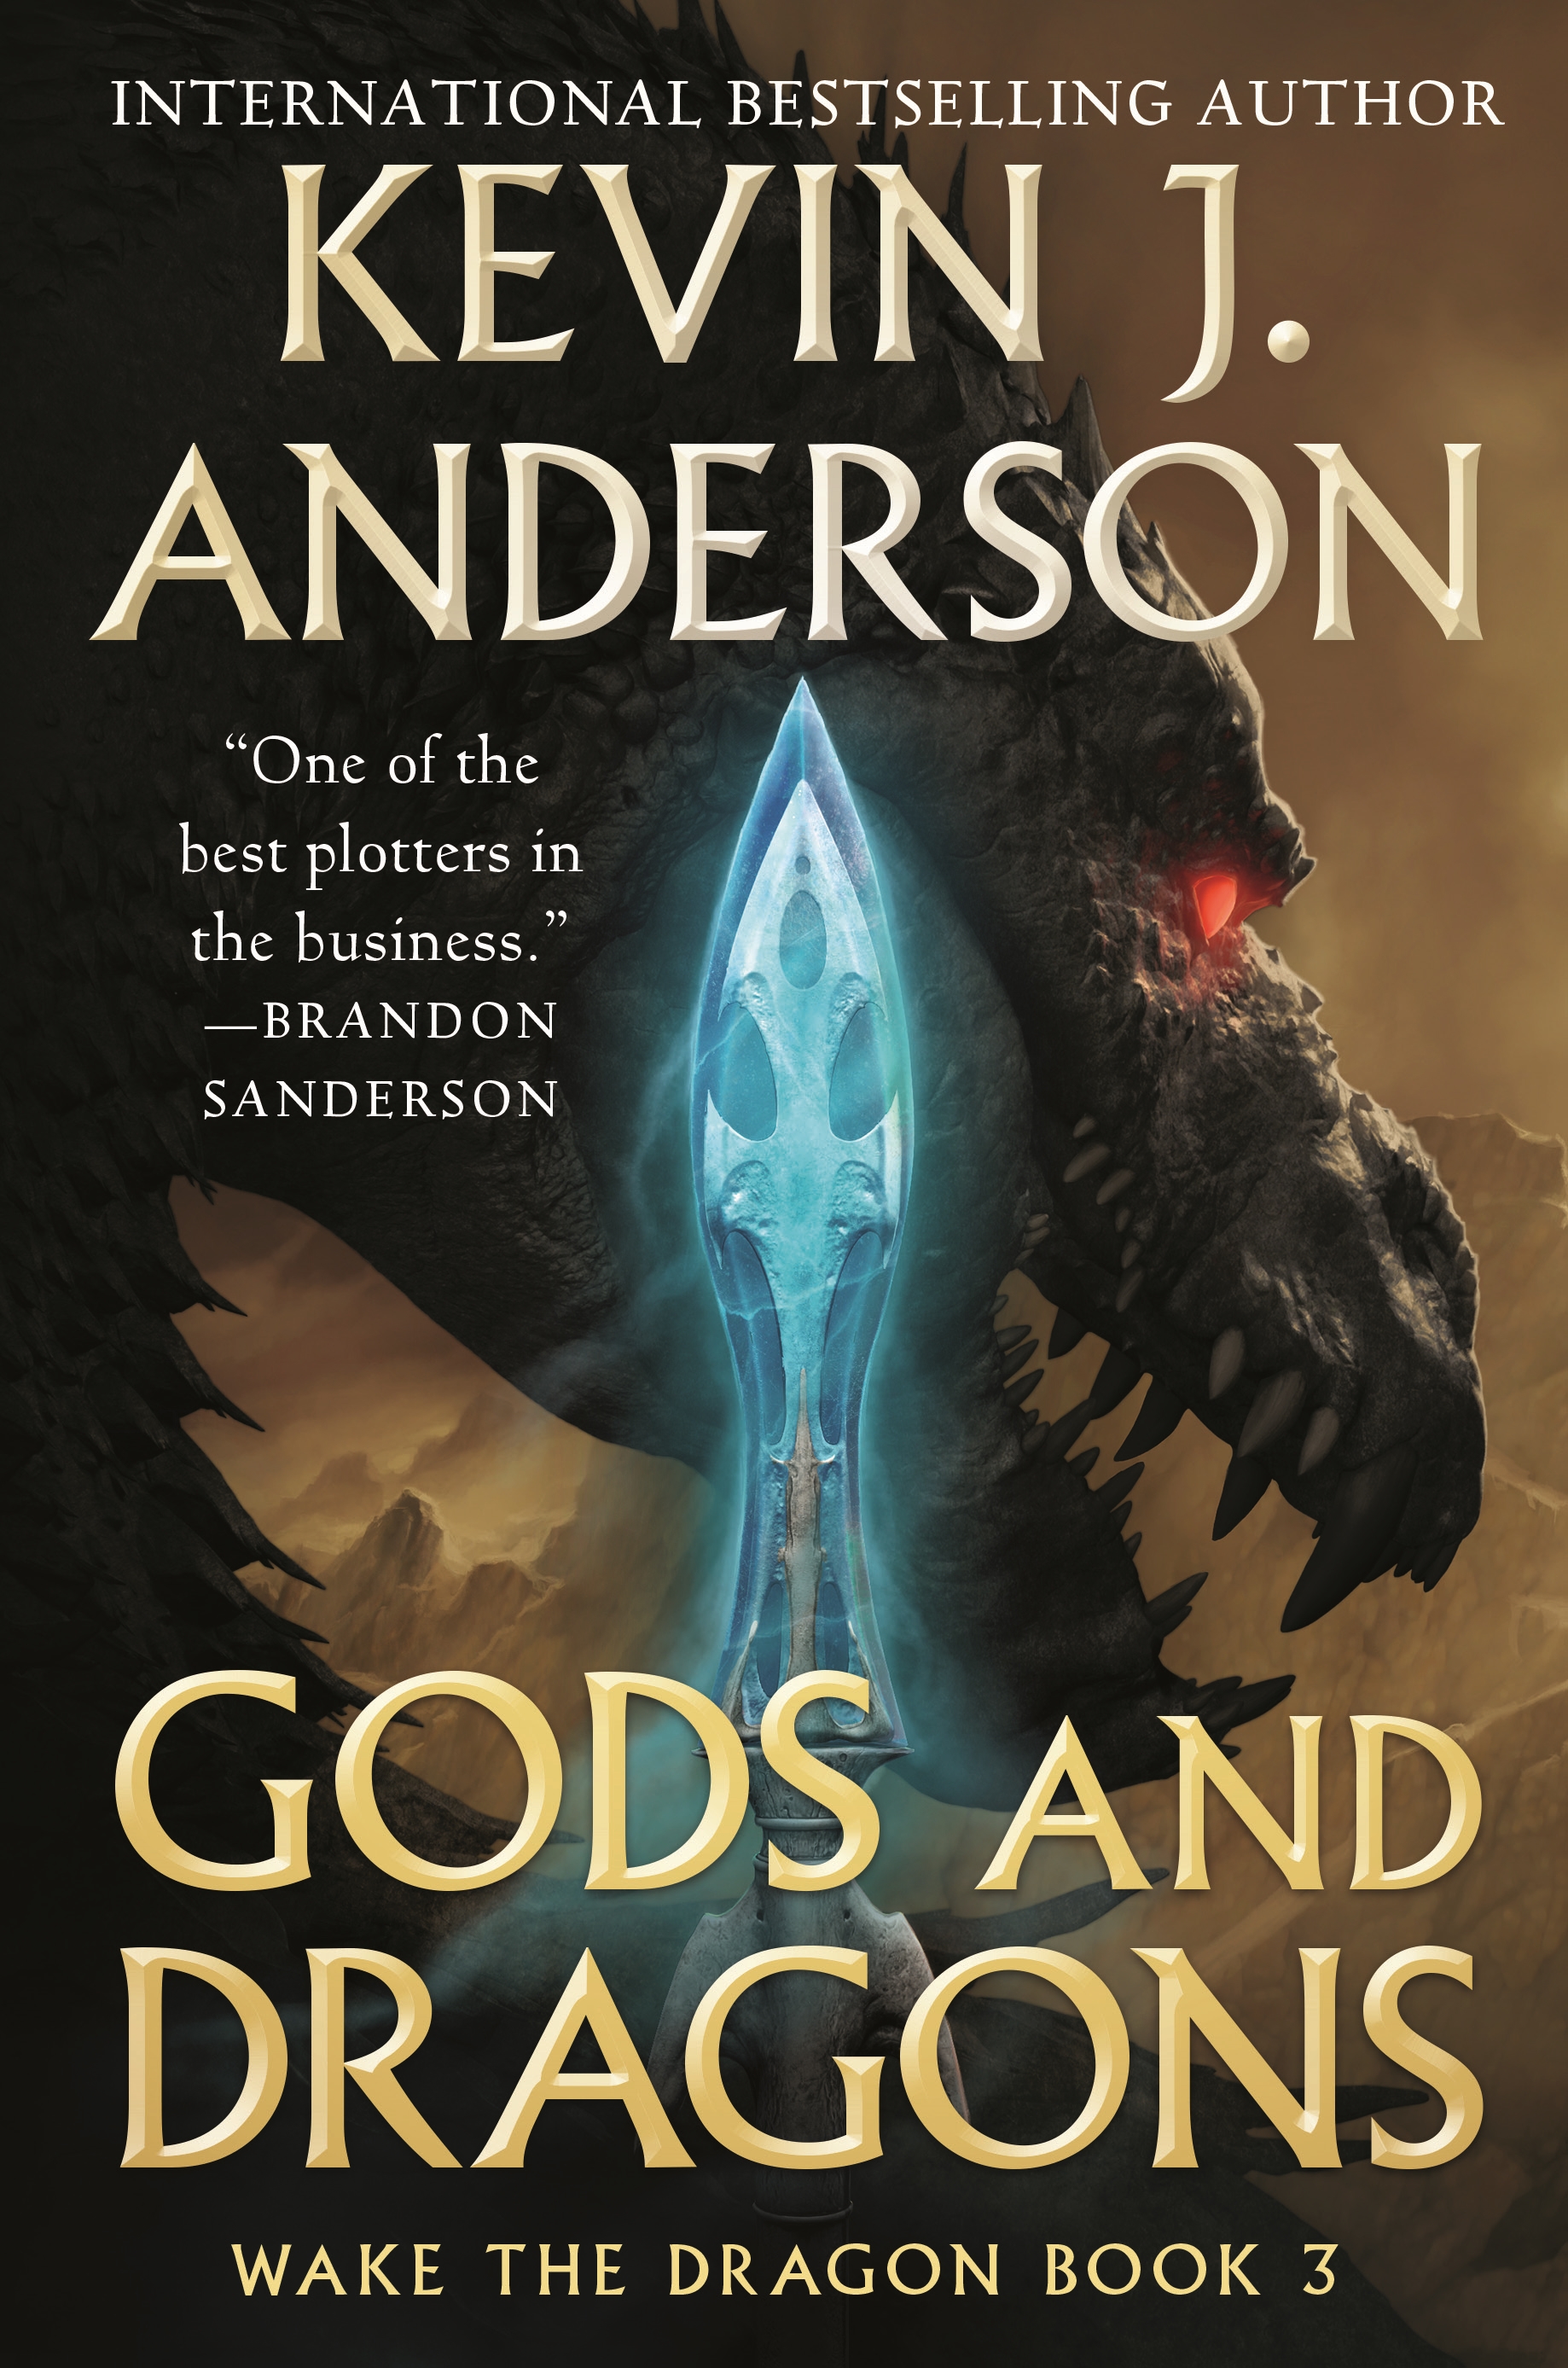 Gods and Dragons : Wake the Dragon Book 3 by Kevin J. Anderson